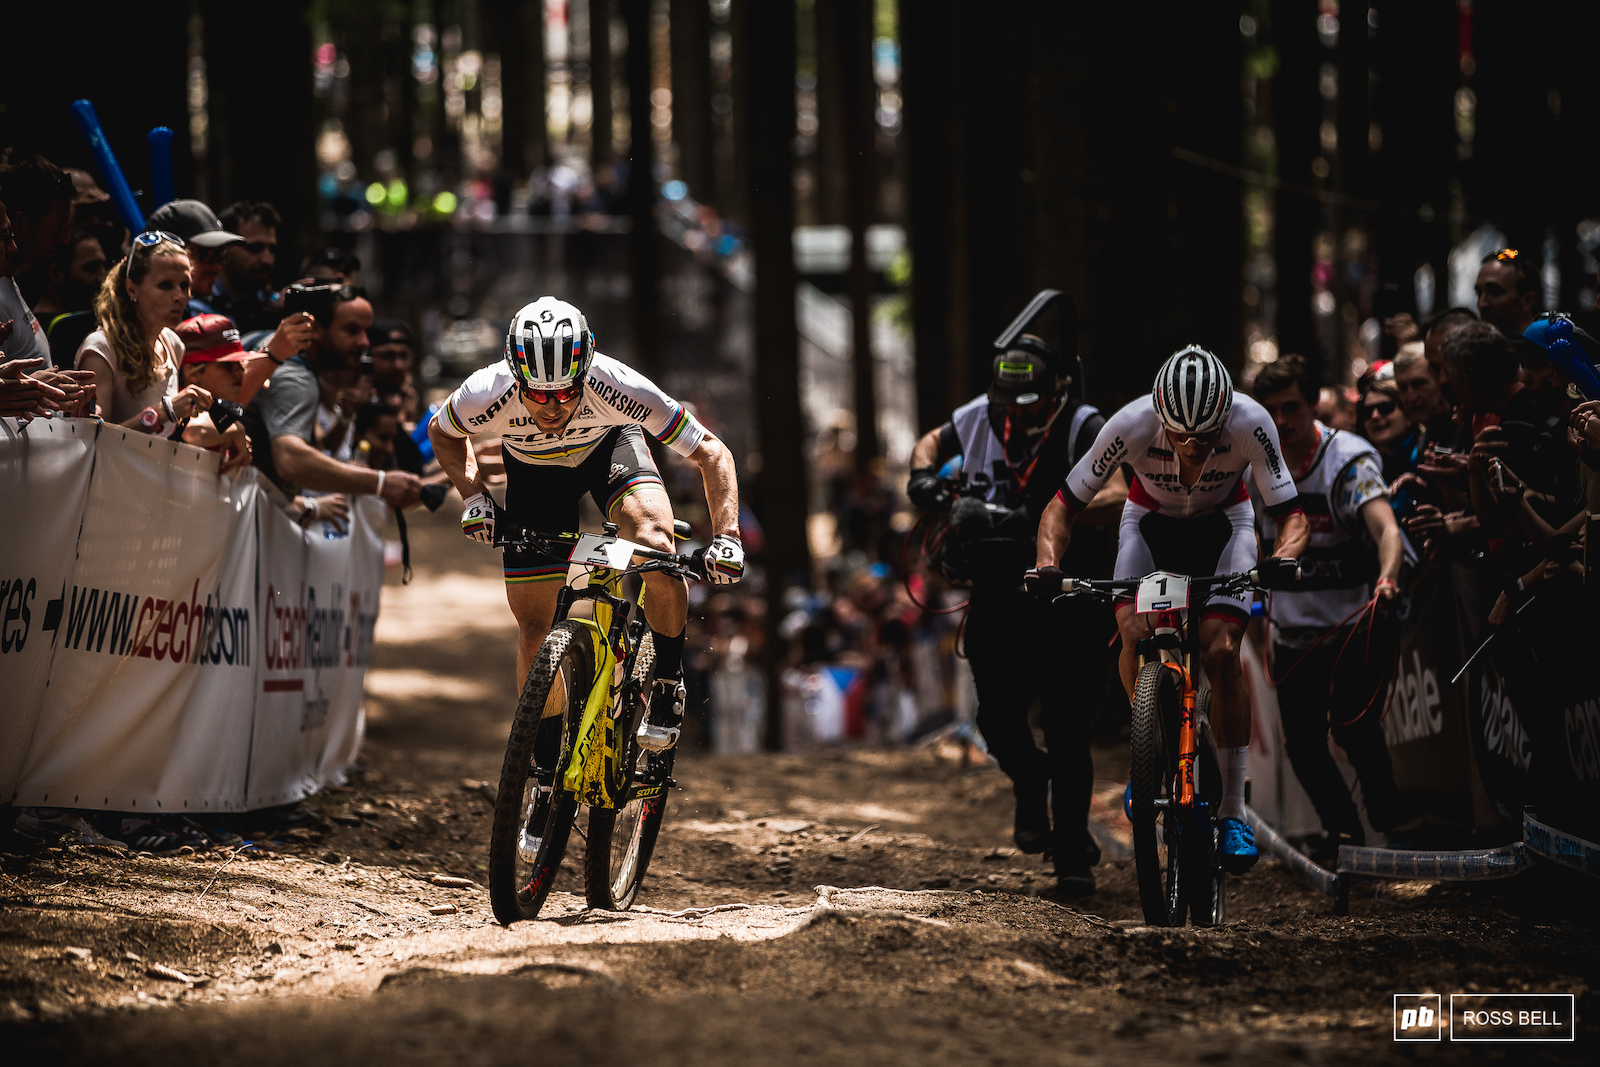 Nino Schurter's every move was being closely monitored.